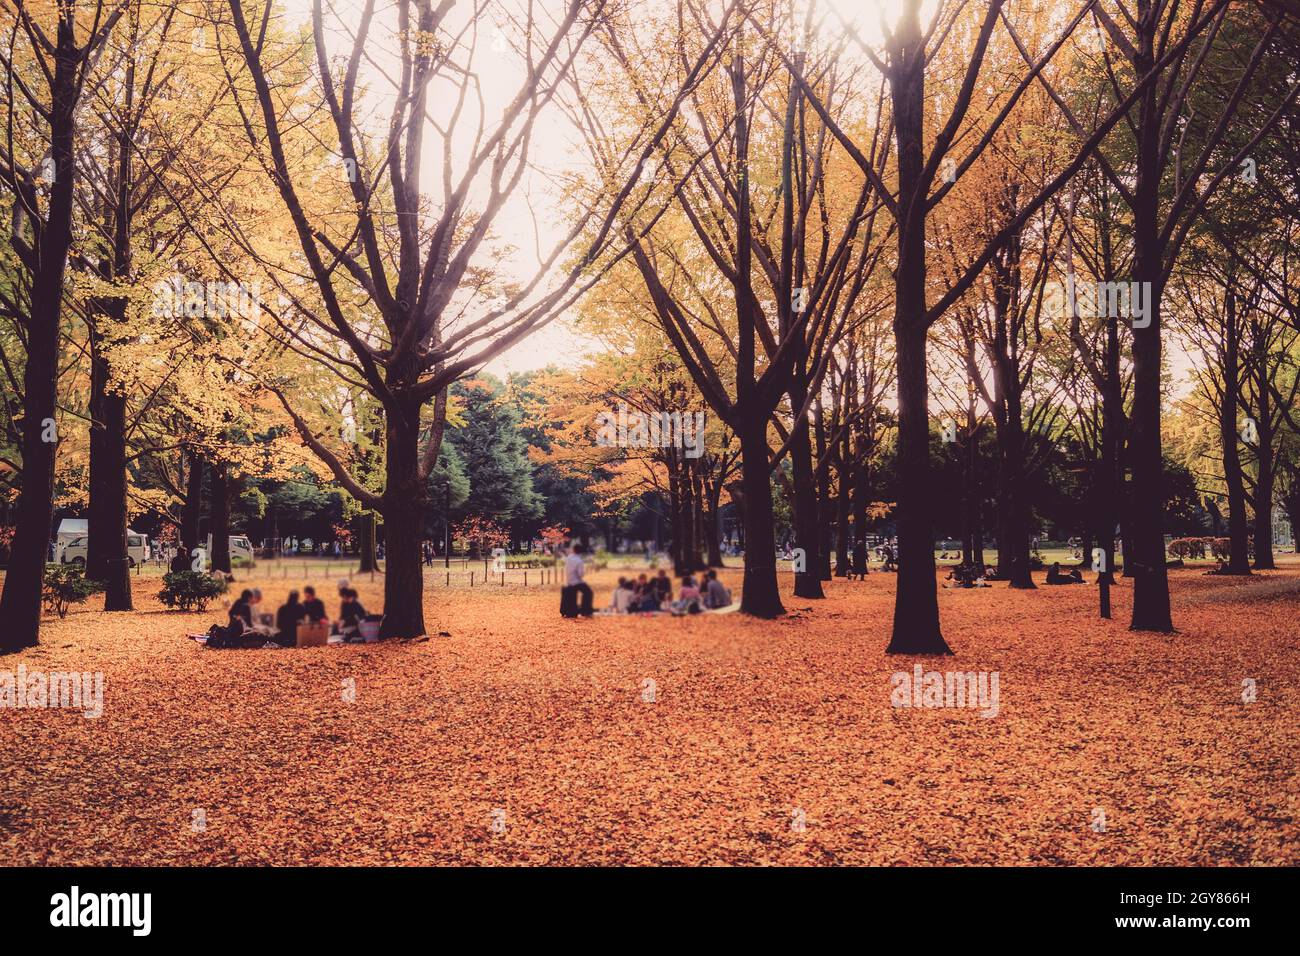 Yoyogi Park, which is covered in autumn leaves. Shooting Location: Tokyo metropolitan area Stock Photo